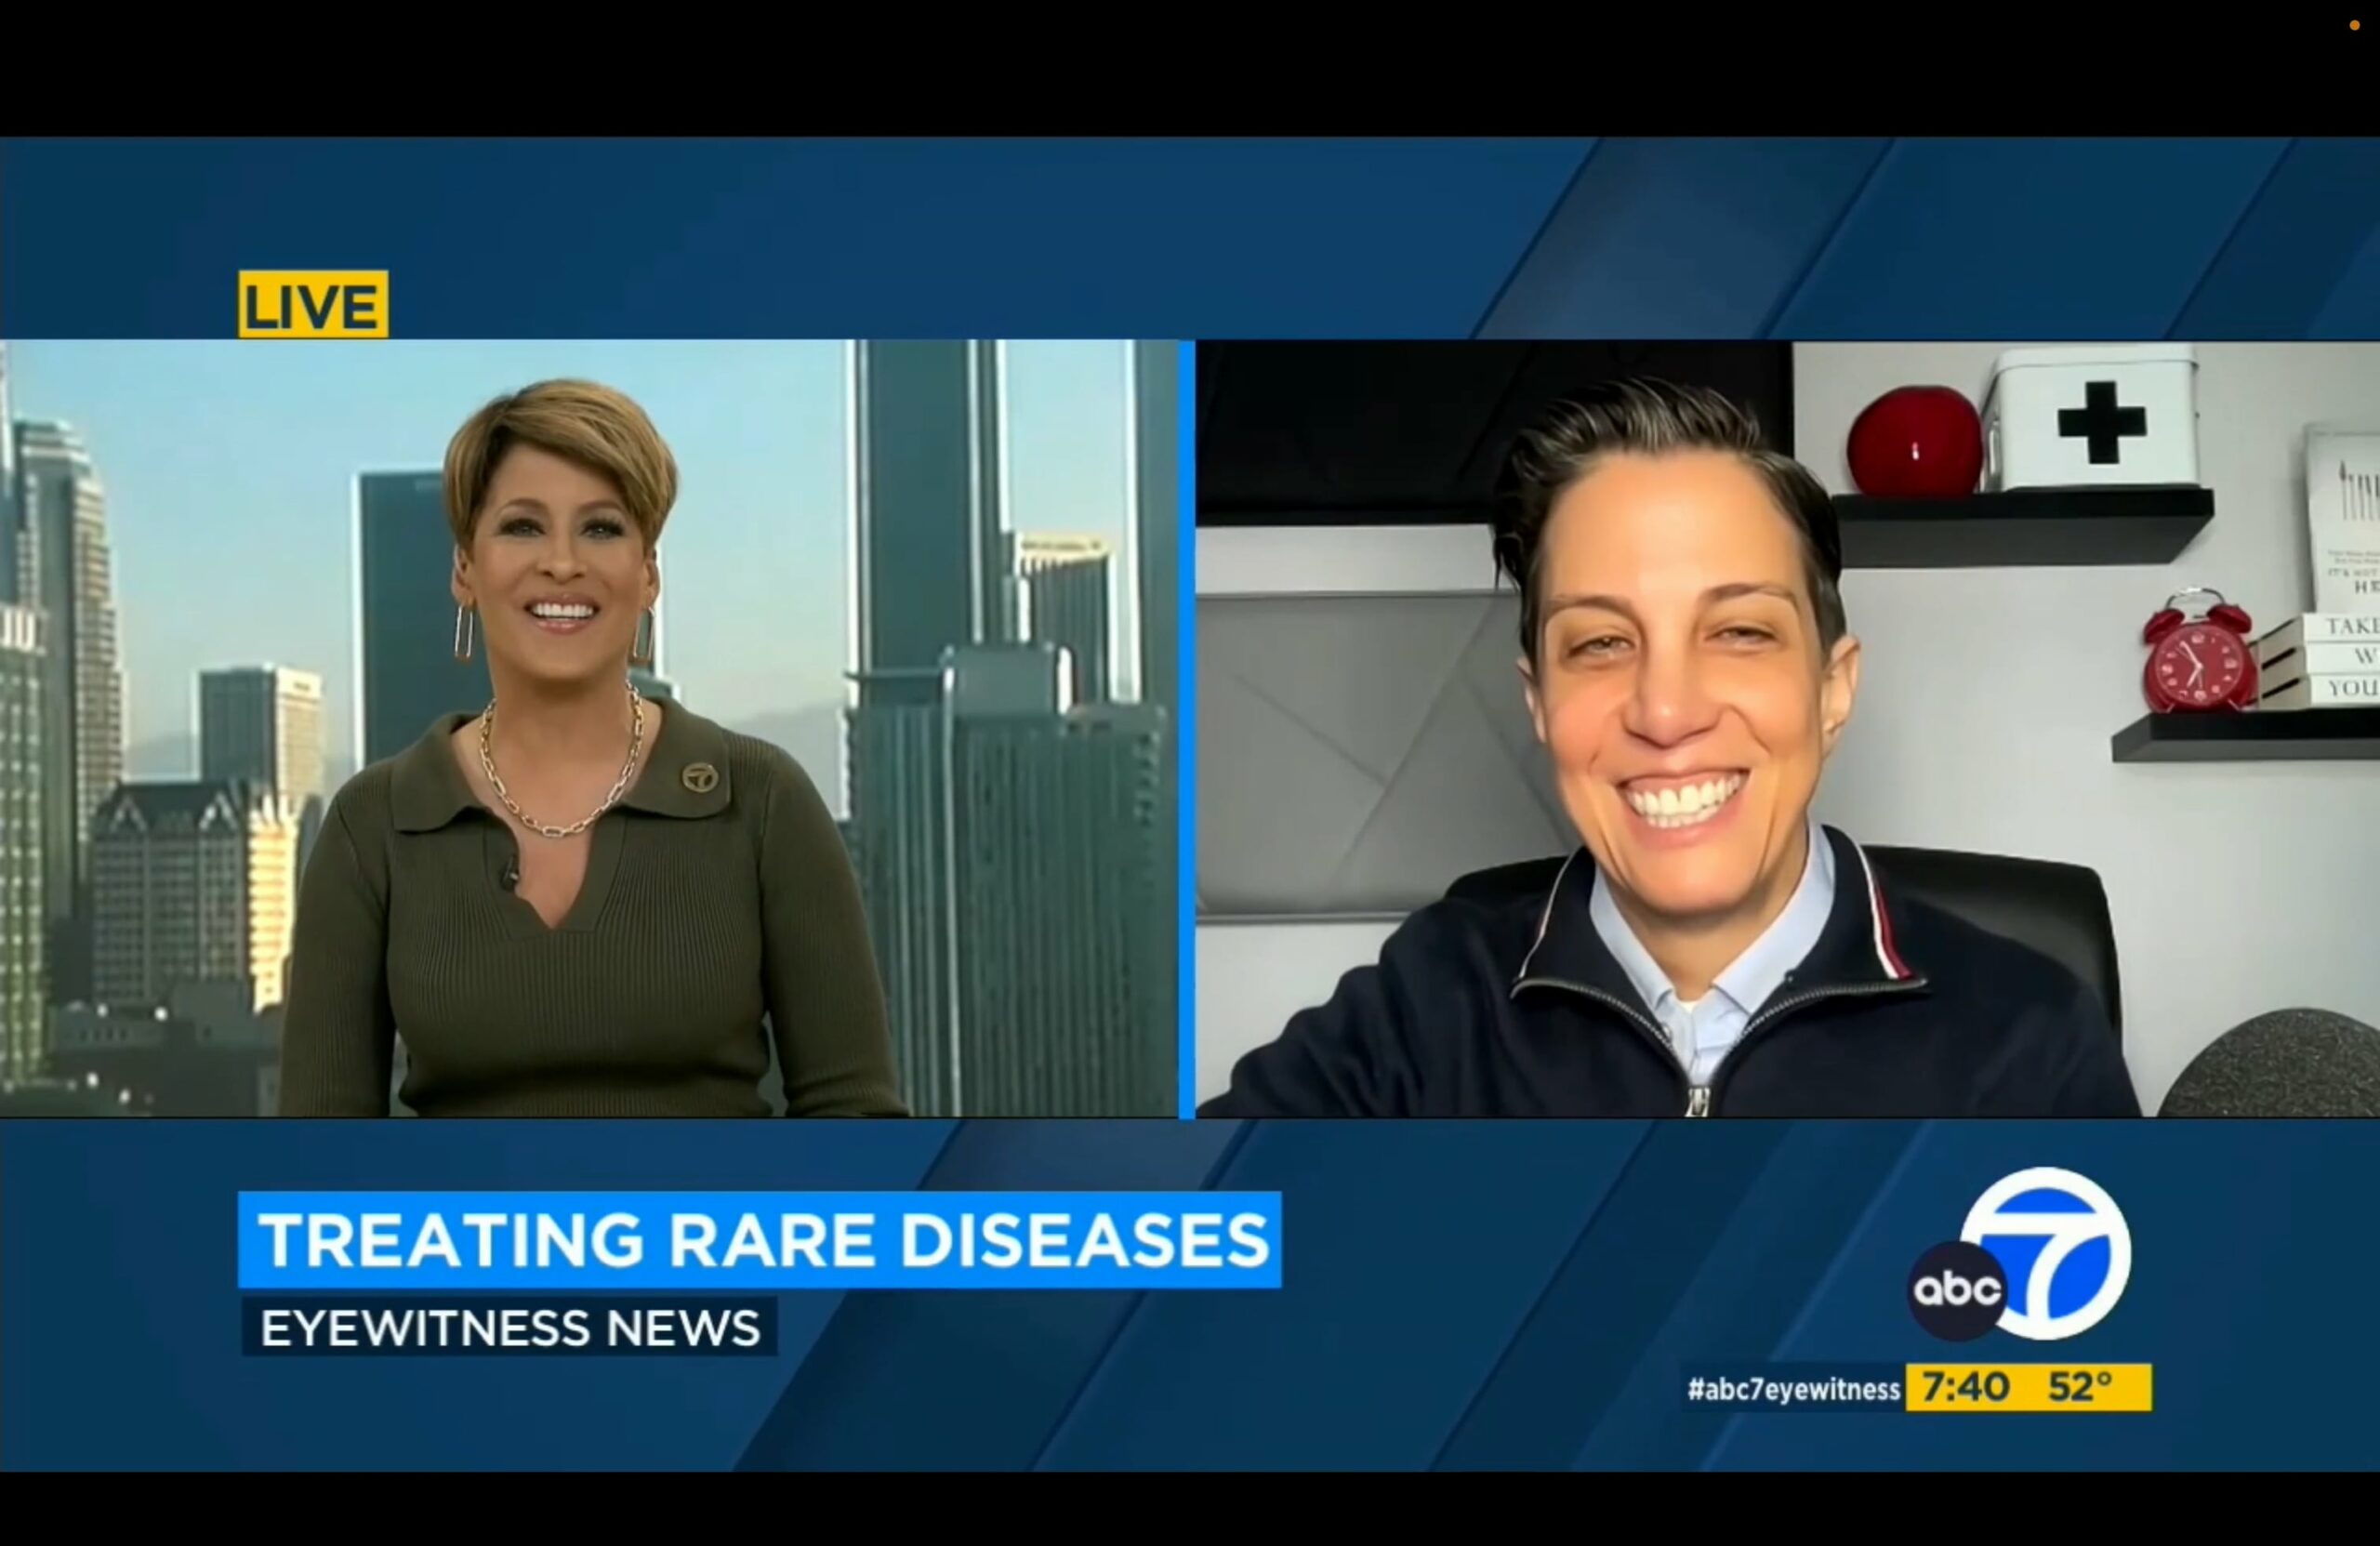 Two people on a news broadcast discussing rare diseases, displayed in a split-screen format with a "live" tag and "abc eyewitness news" logo.